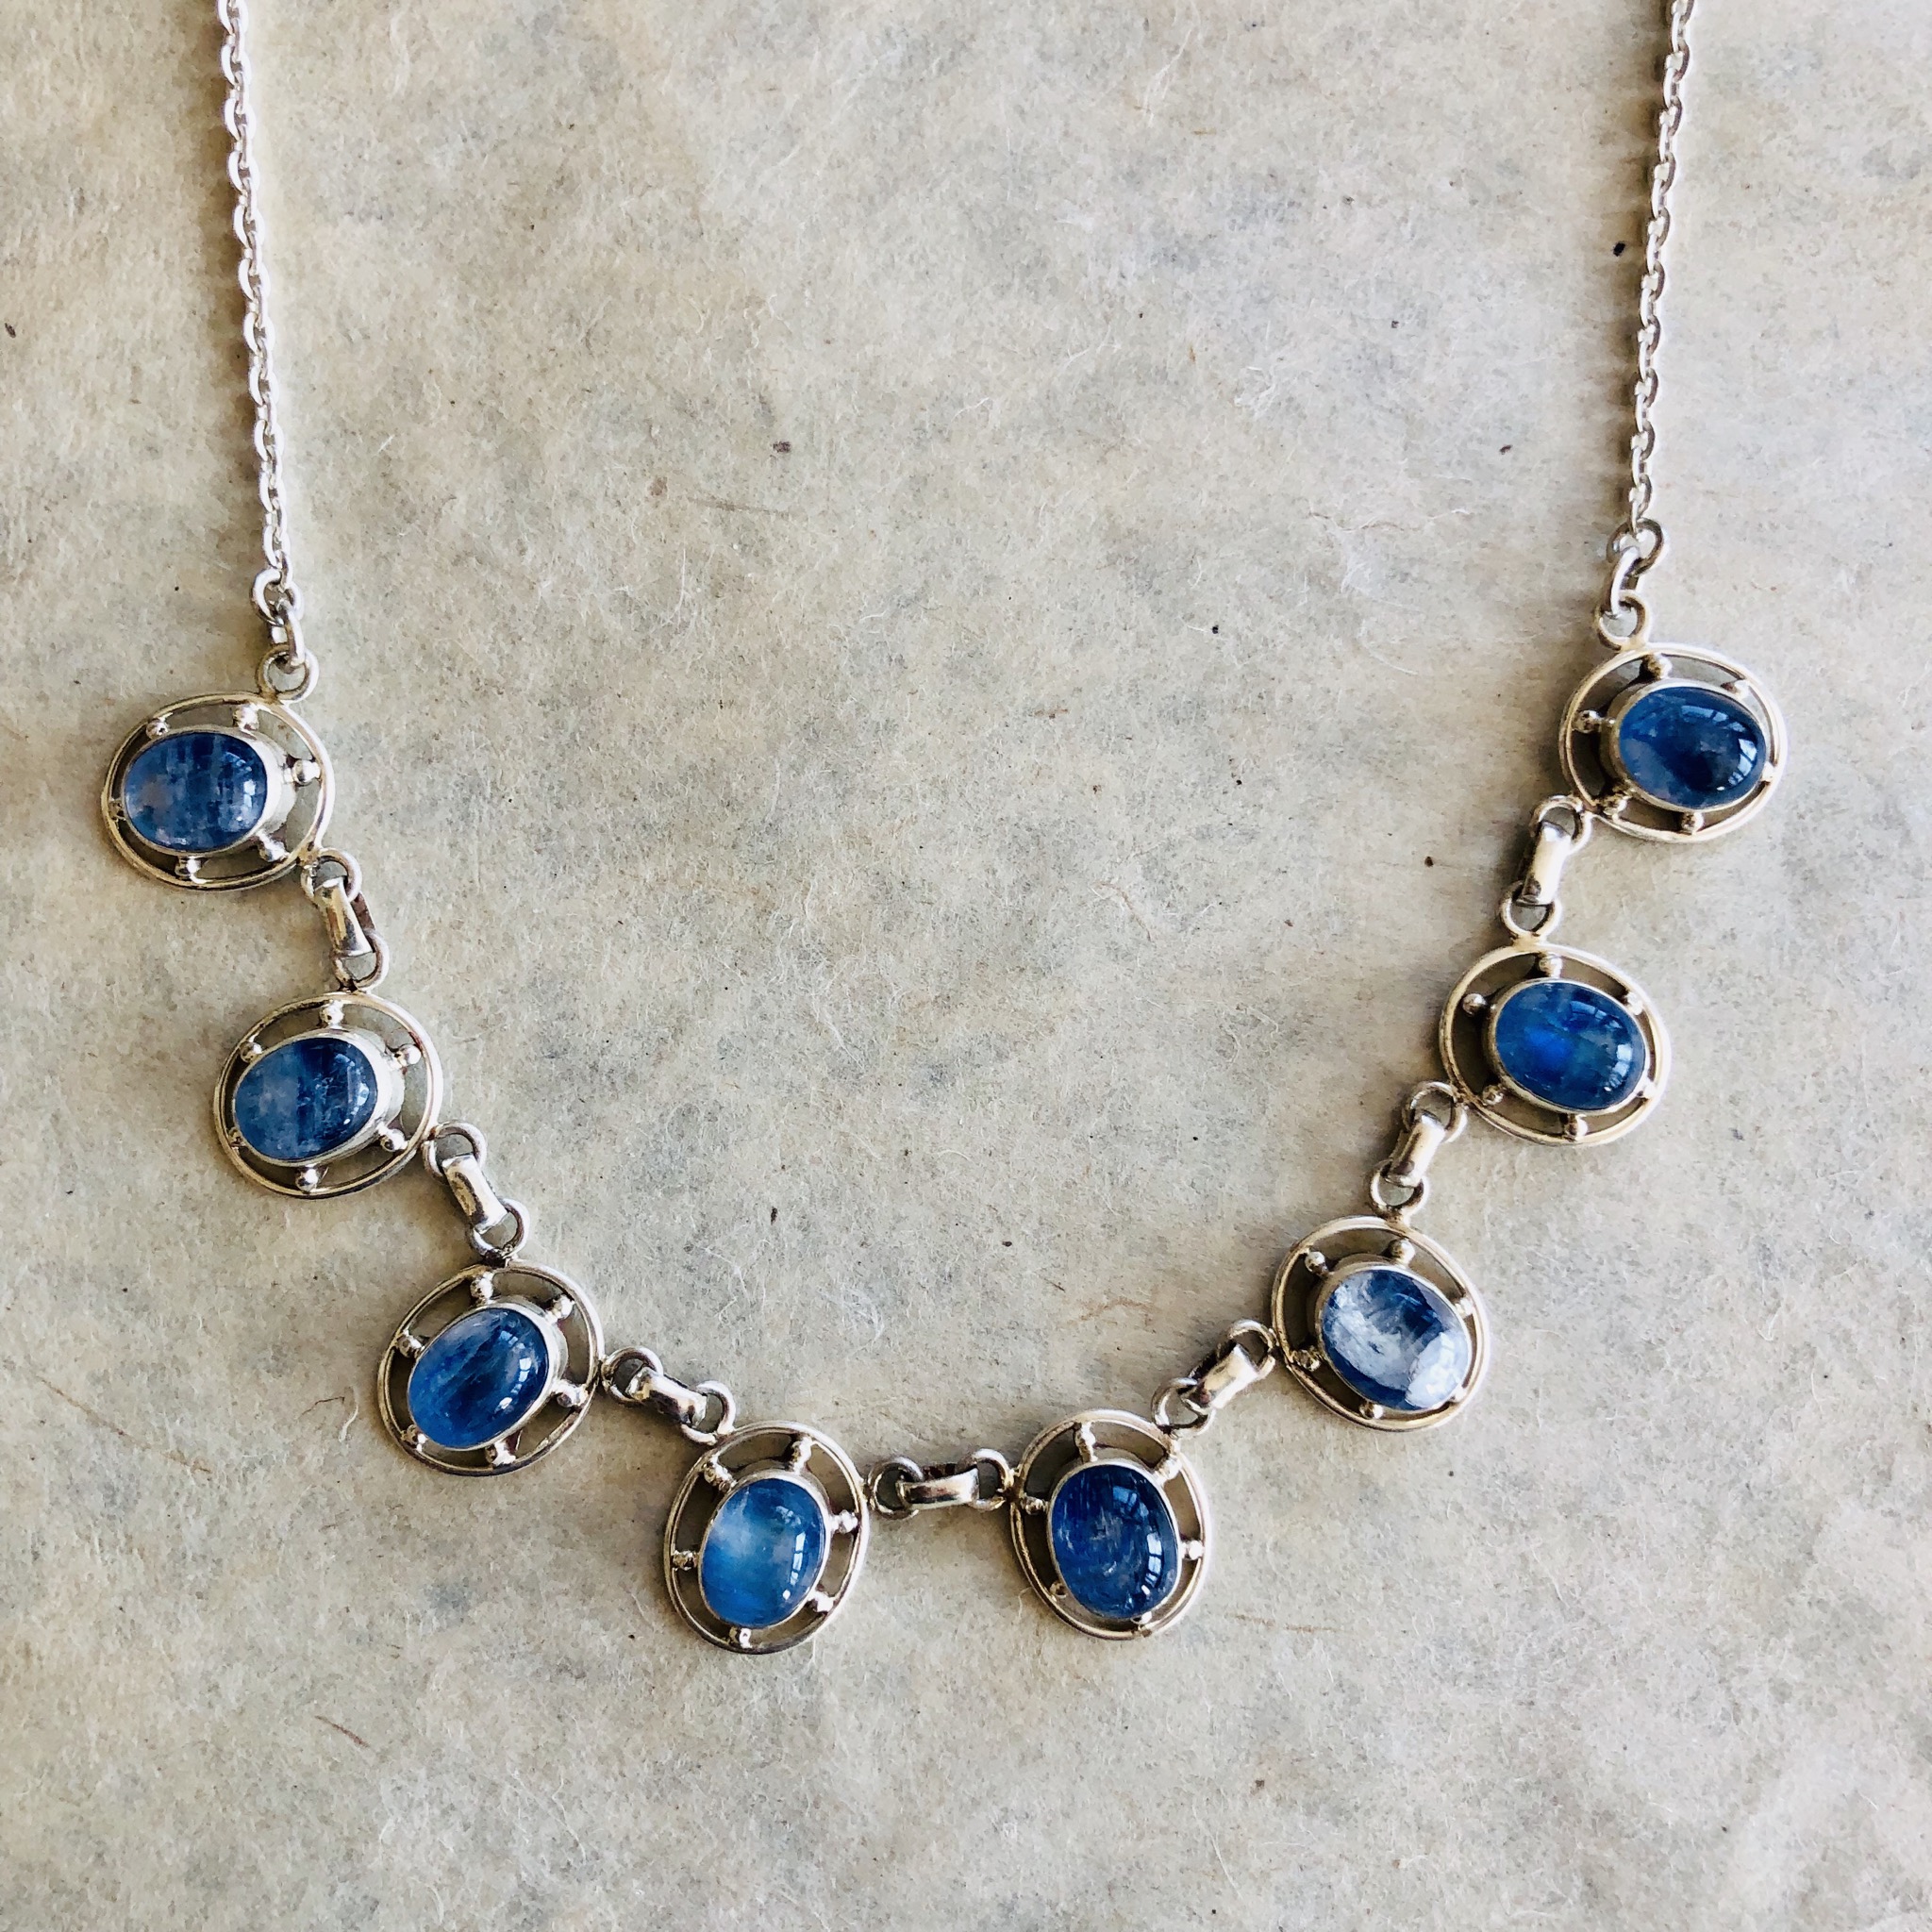 【STAR JEWELRY】 BLUE MOONSTONE NECKLACEイエローゴールド